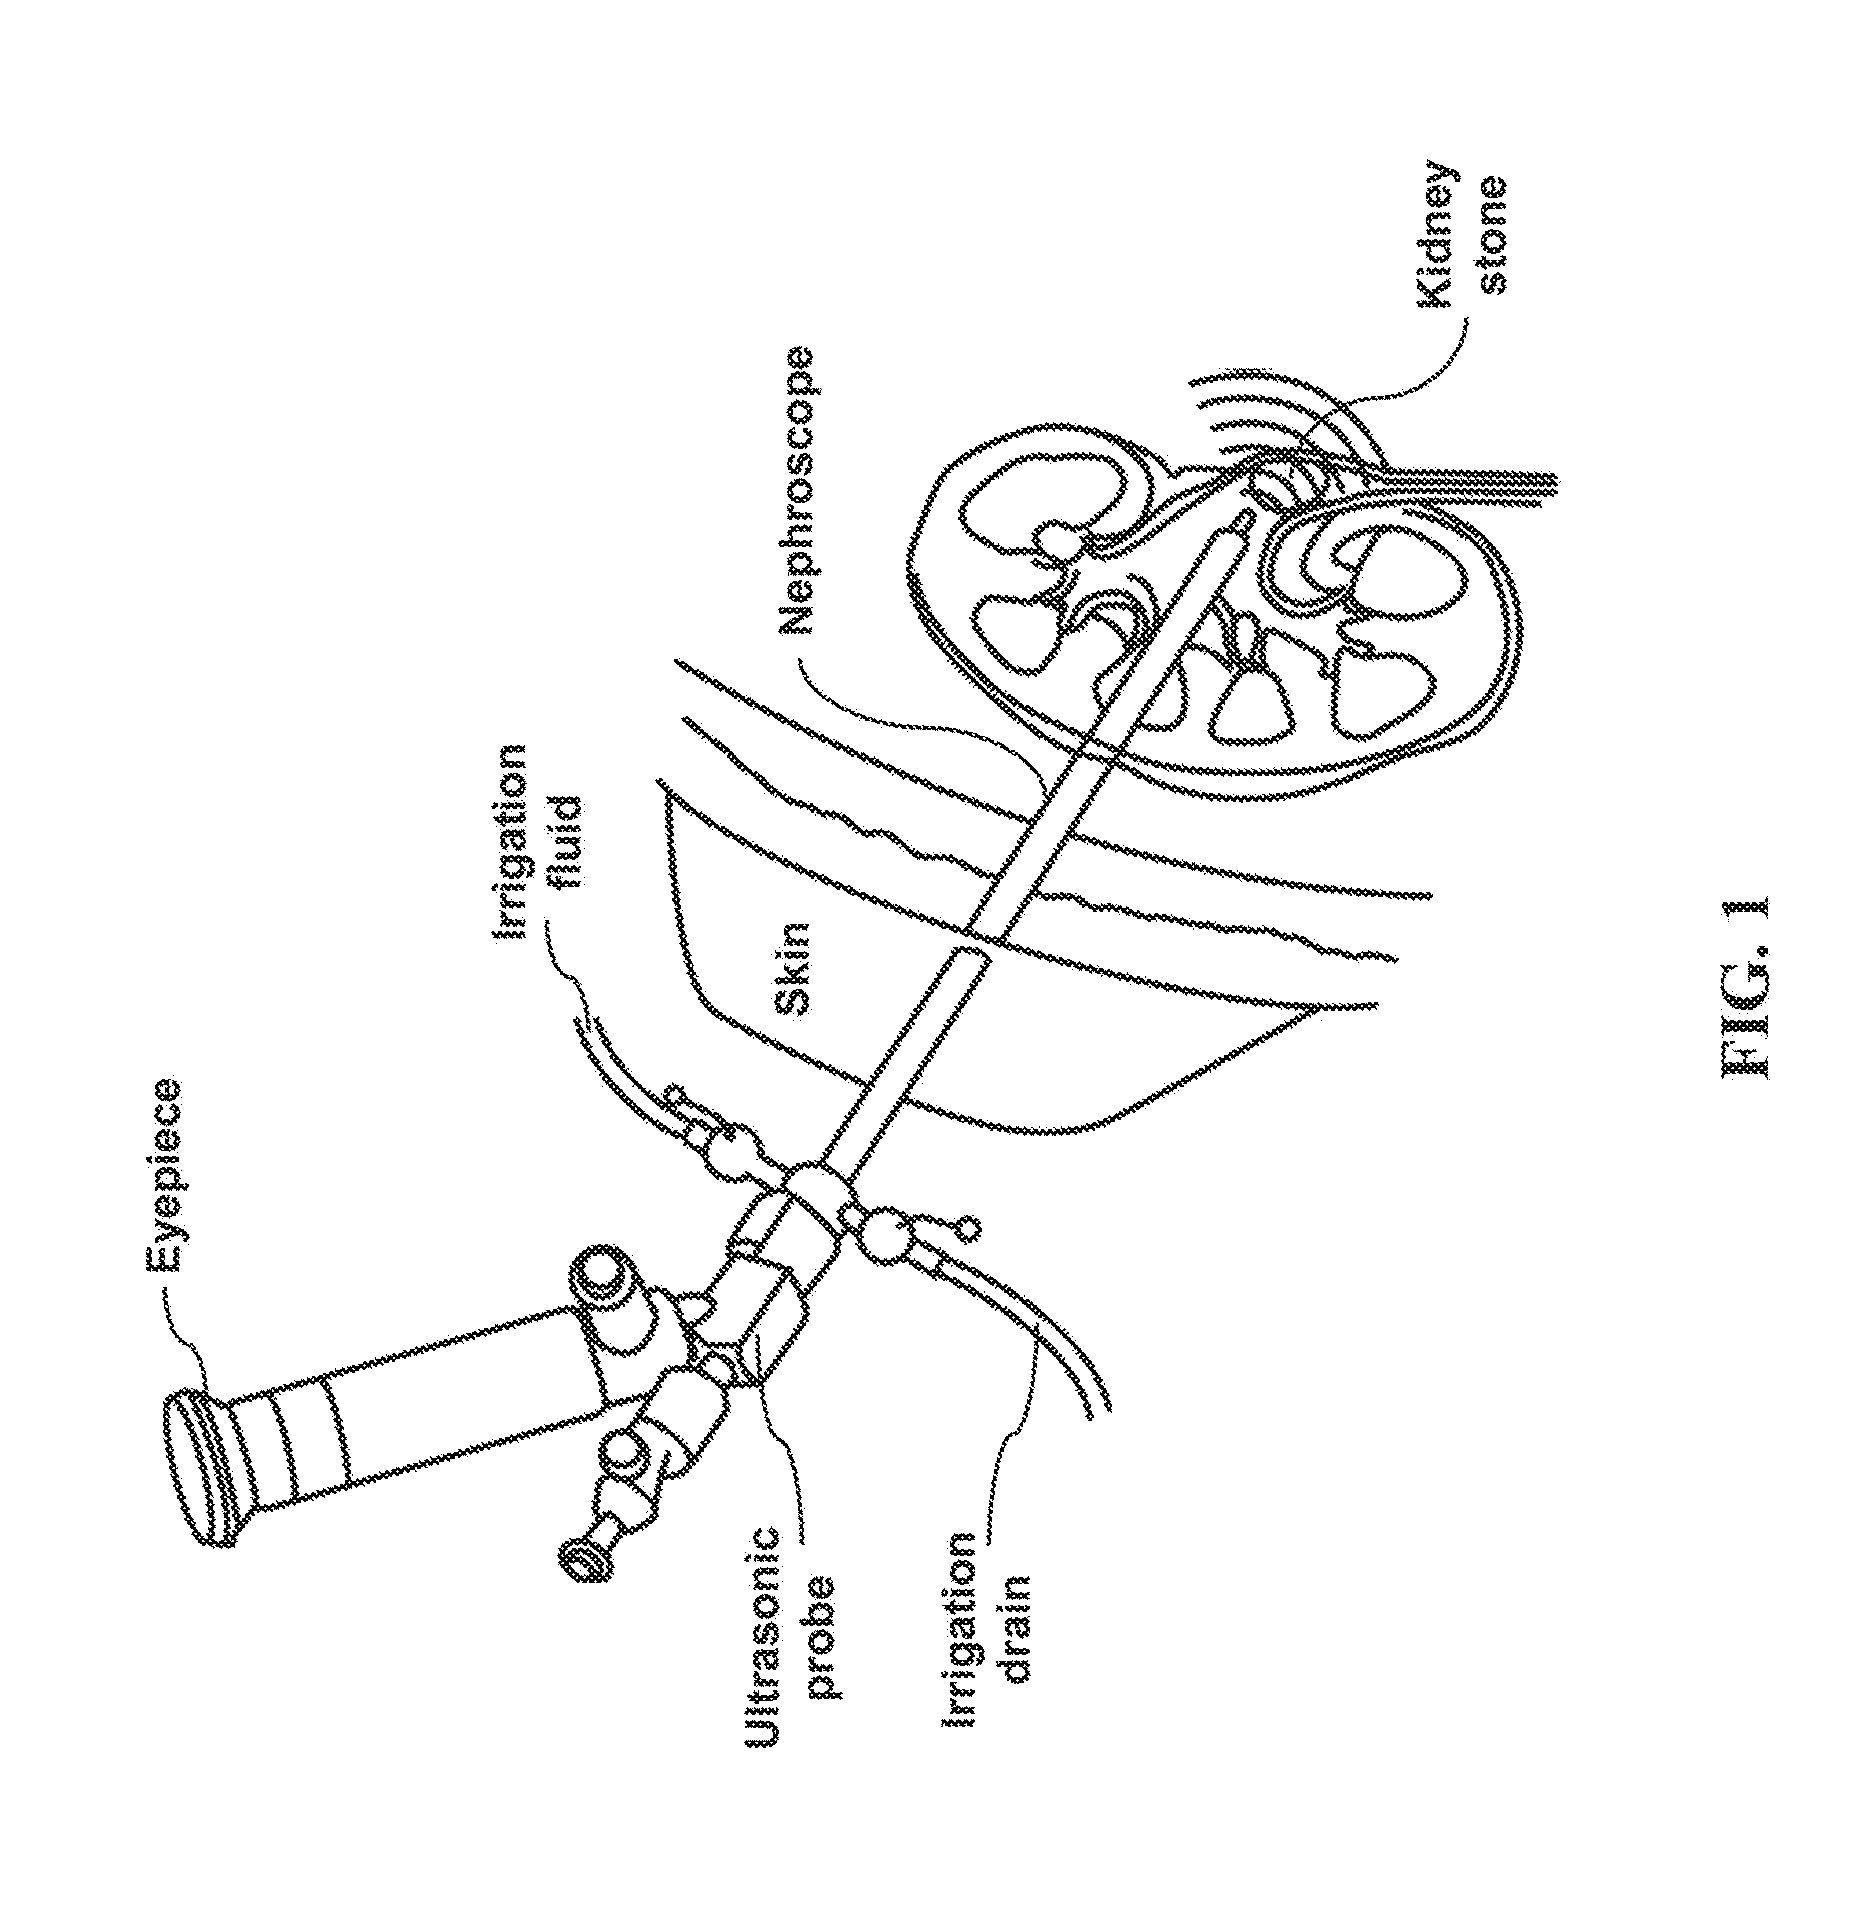 Method and System for Interactive 3D Scope Placement and Measurements for Kidney Stone Removal Procedure